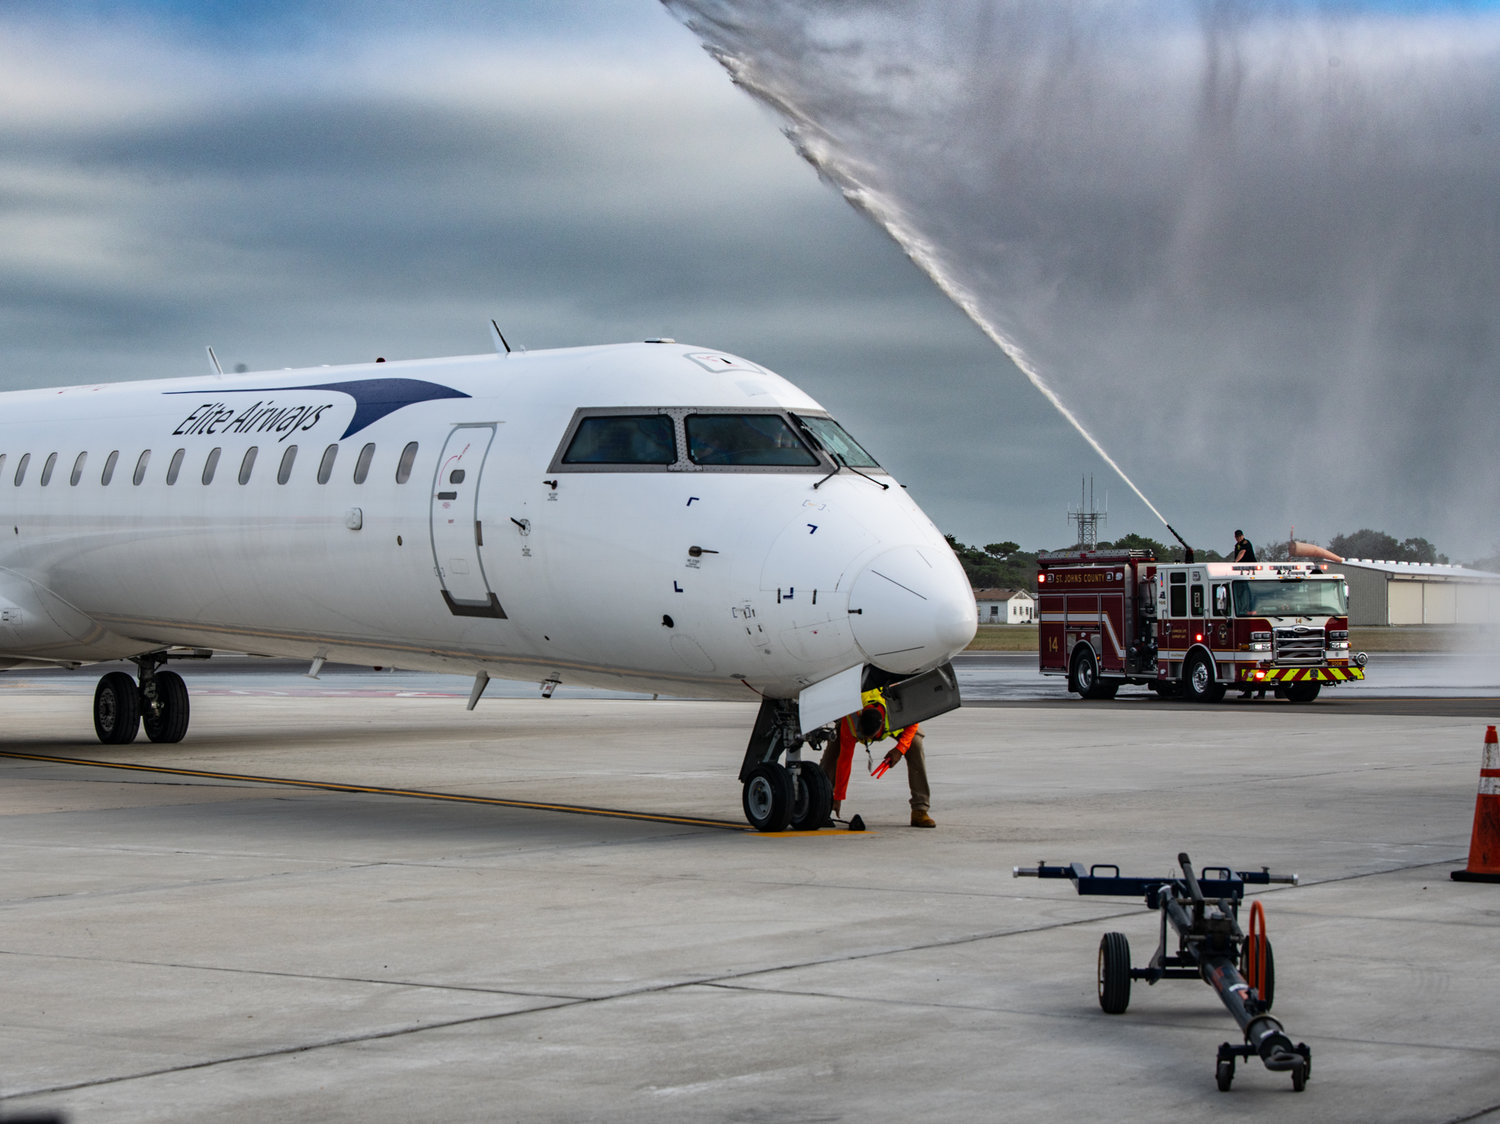 The Northeast Florida Regional Airport welcomed the first incoming commercial flight in roughly two years with a water cannon salute.